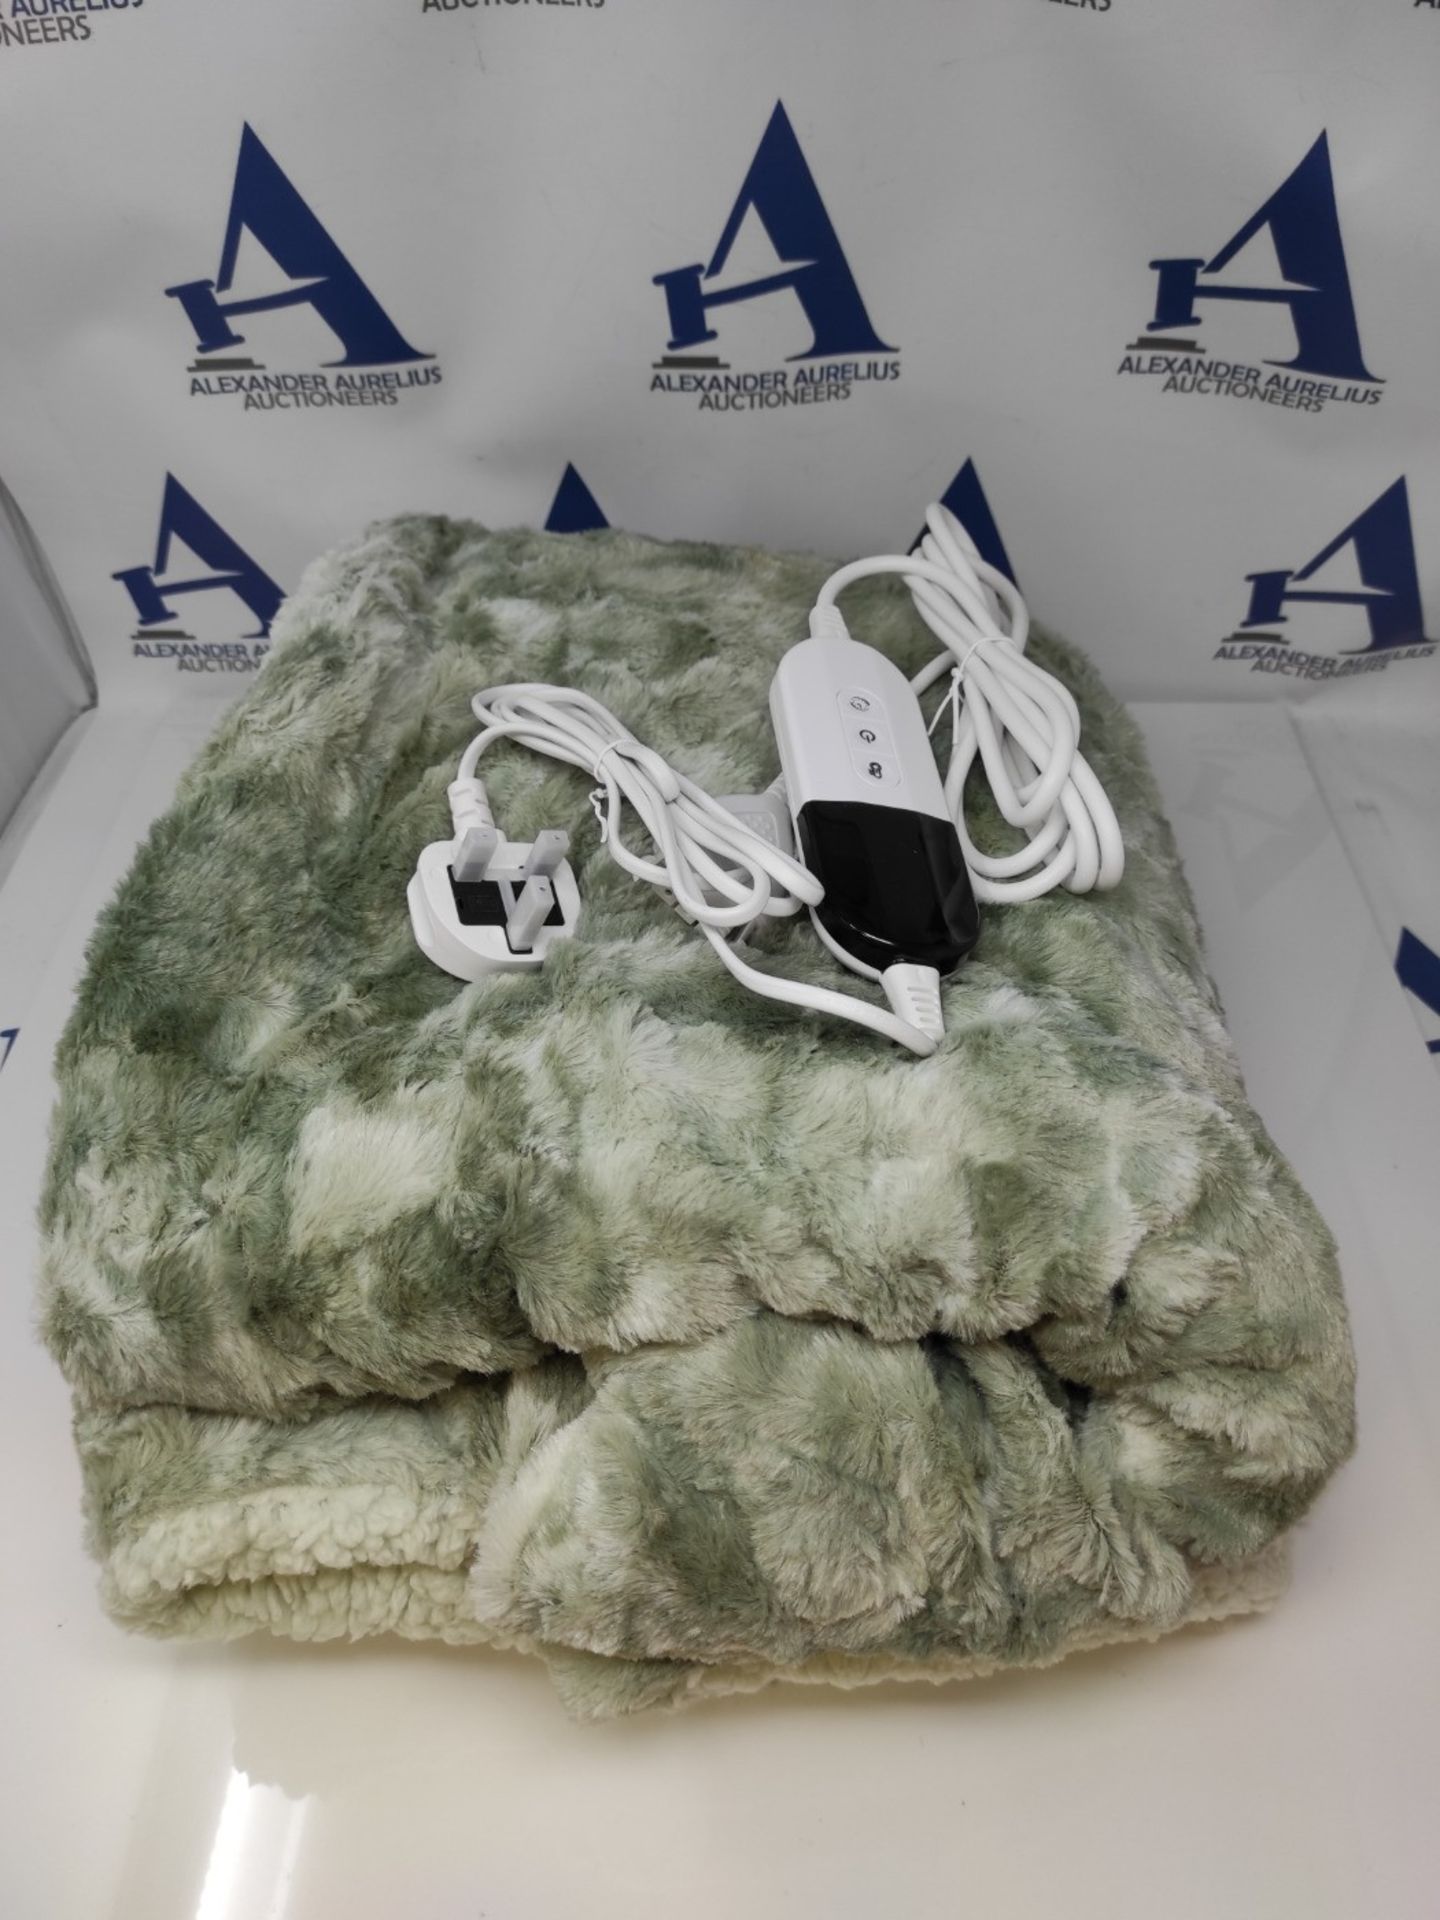 CURECURE Electric Blanket Throw 130 * 180cm, Tie-dye Heated Blanket with 6 Heating Lev - Image 2 of 2